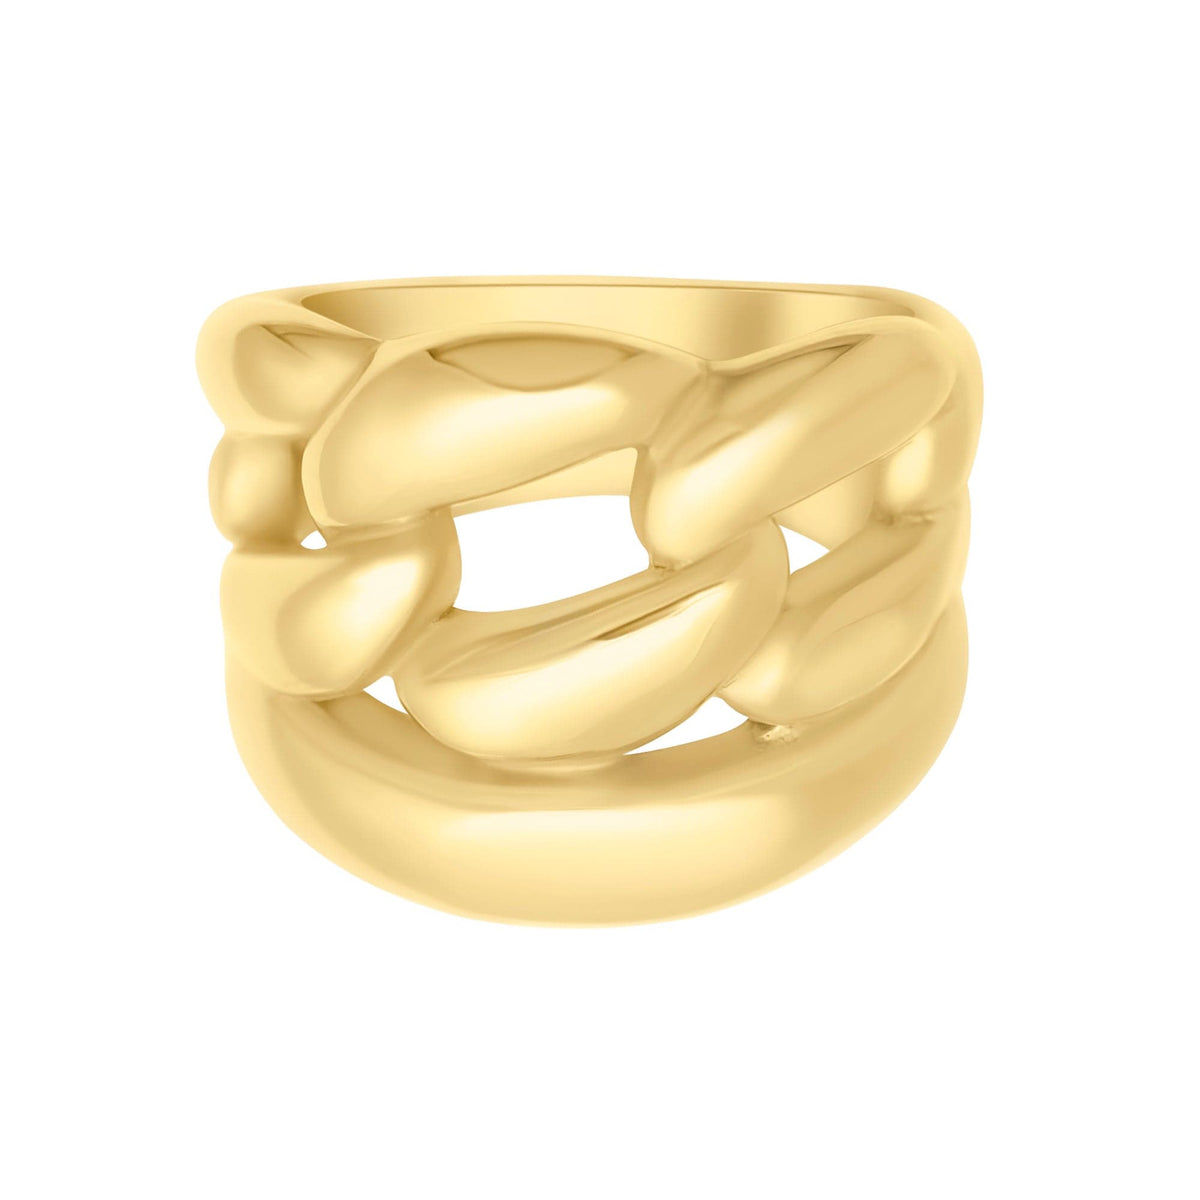 BohoMoon Stainless Steel Nyra Ring Gold / US 6 / UK L / EUR 51 (small)